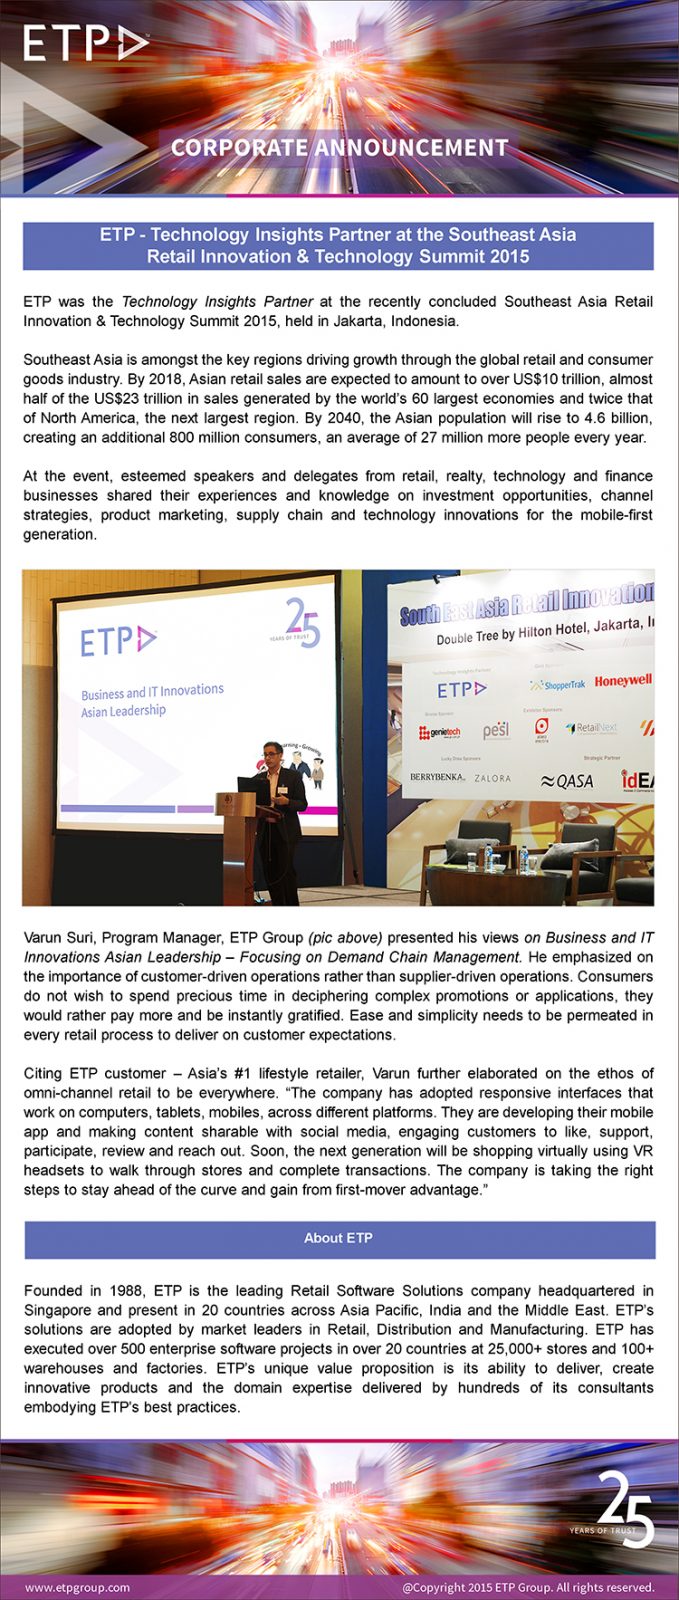 ETP - Technology Insights Partner at Southeast Asia Retail Innovation & Technology Summit 2015